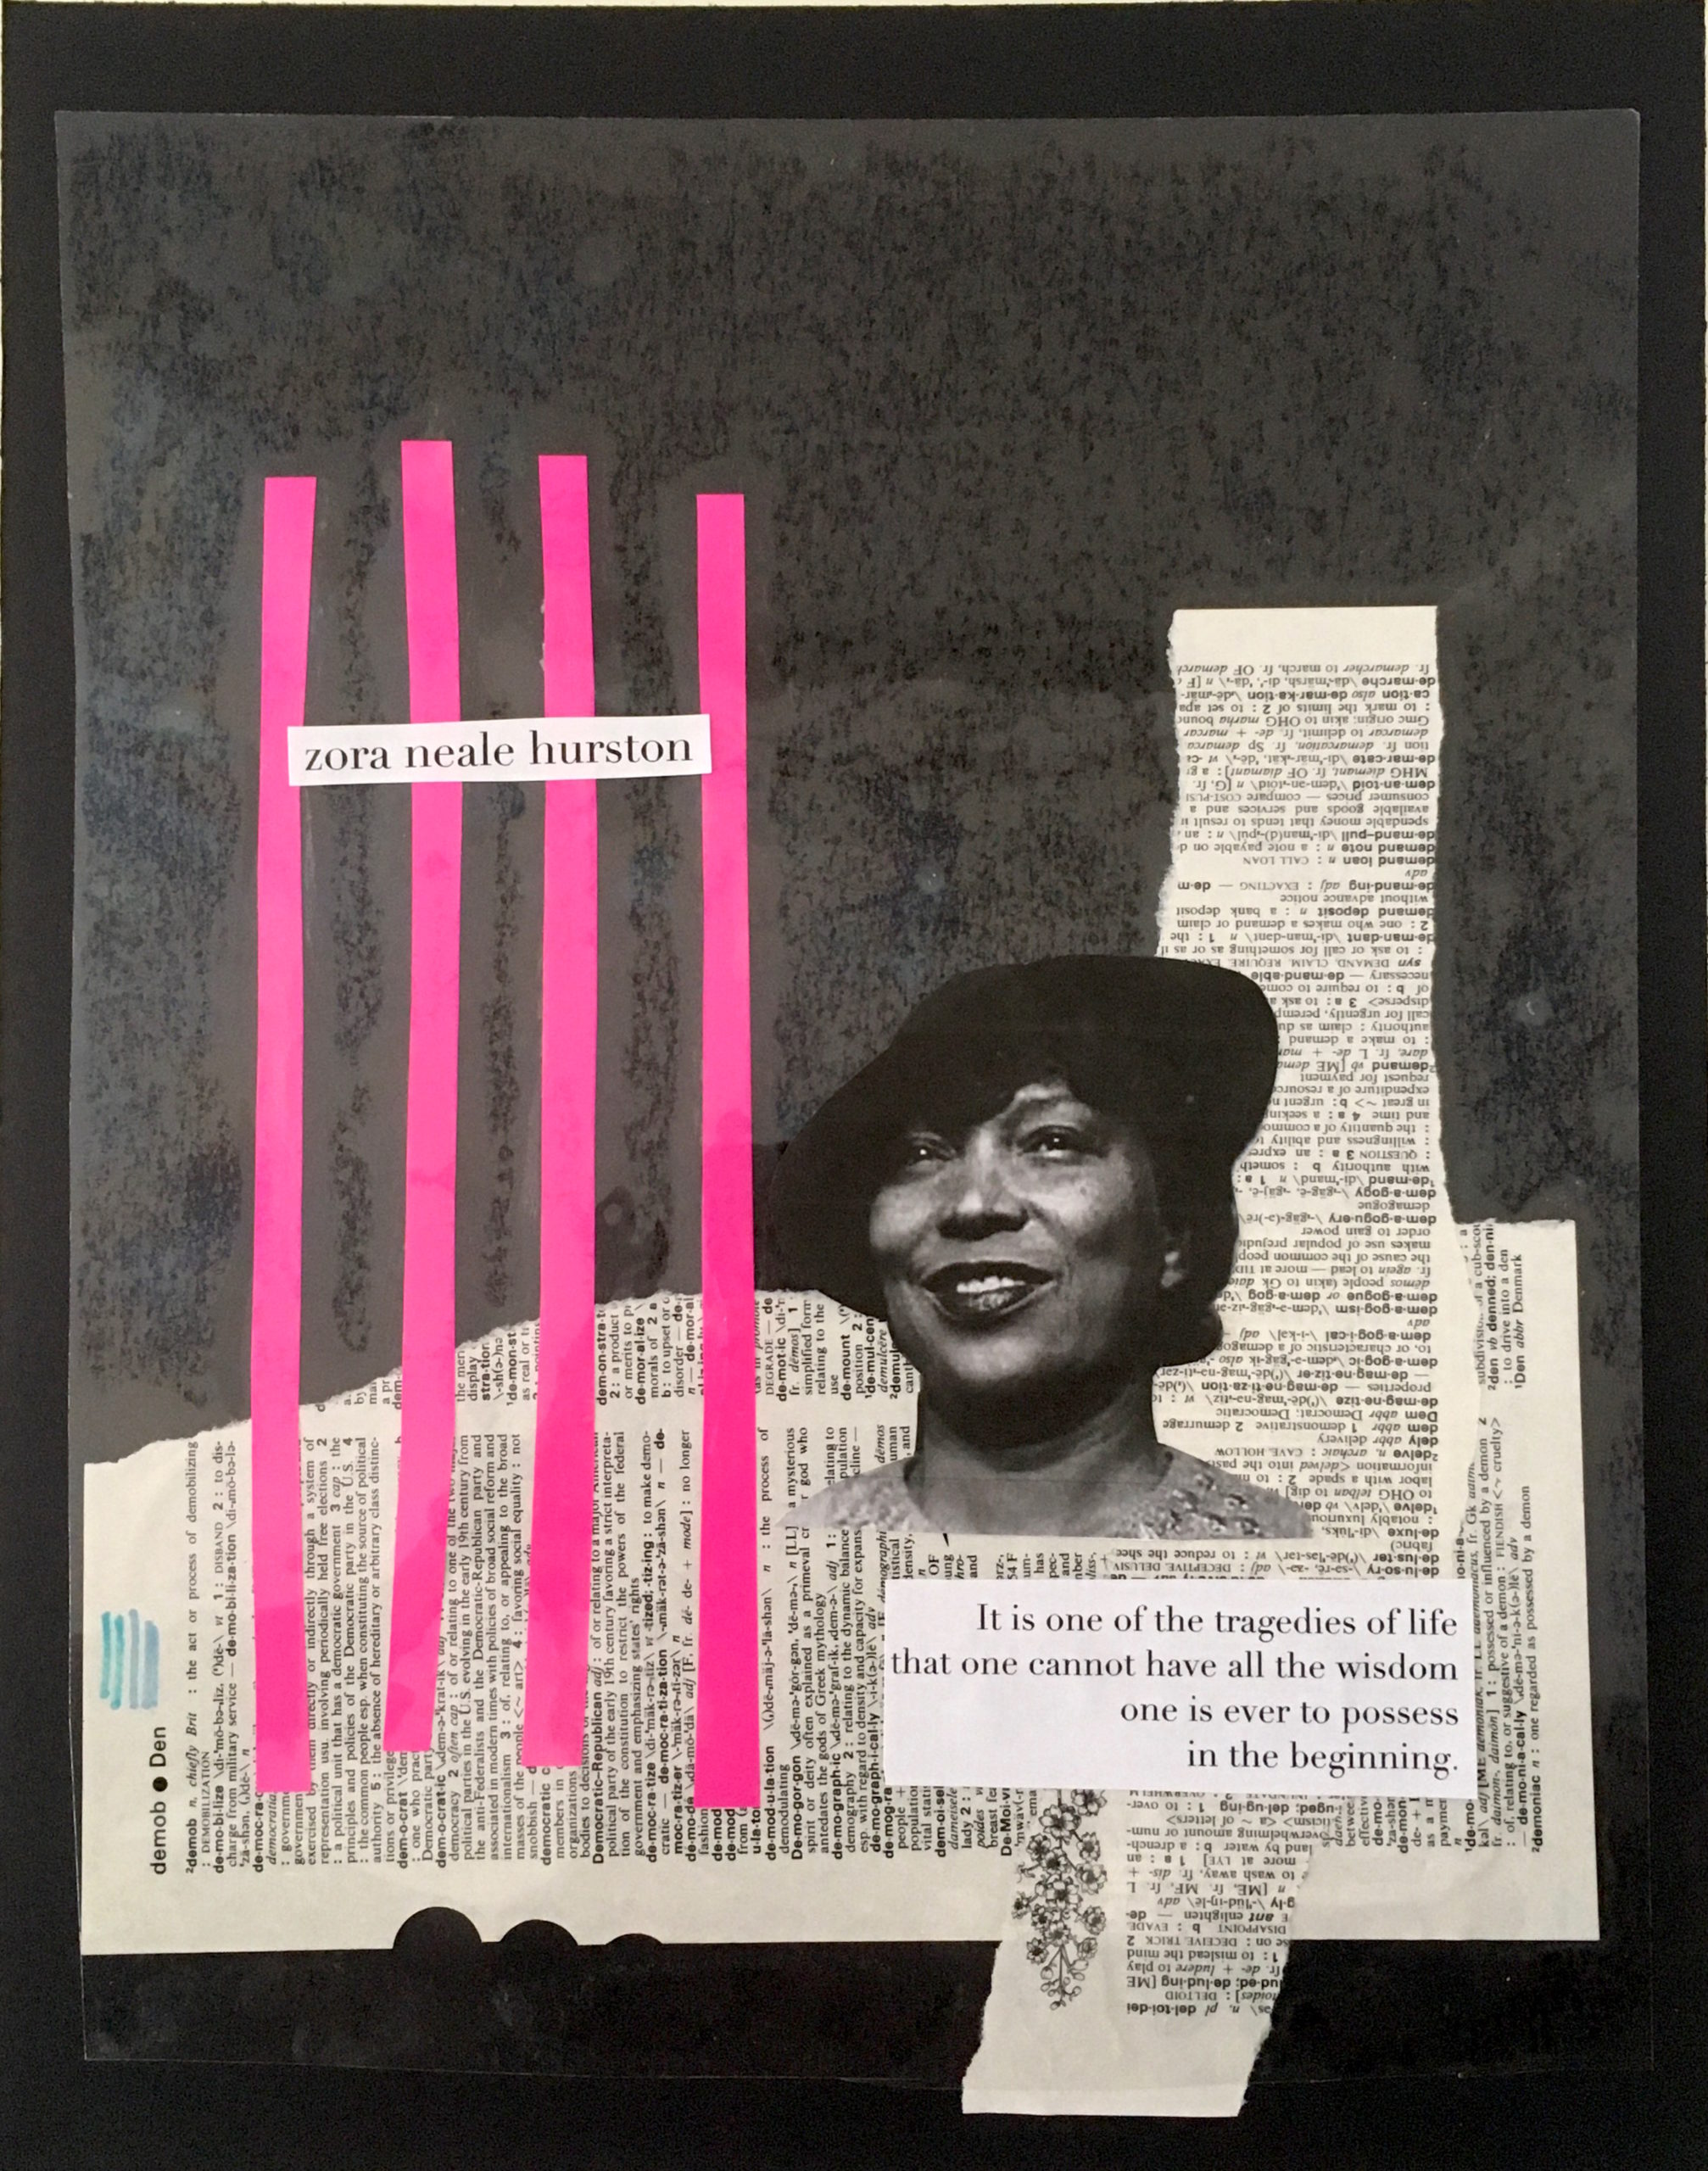 example of collage portrait showing Zora Neale Hurston's portrait over a collaged dictionary page